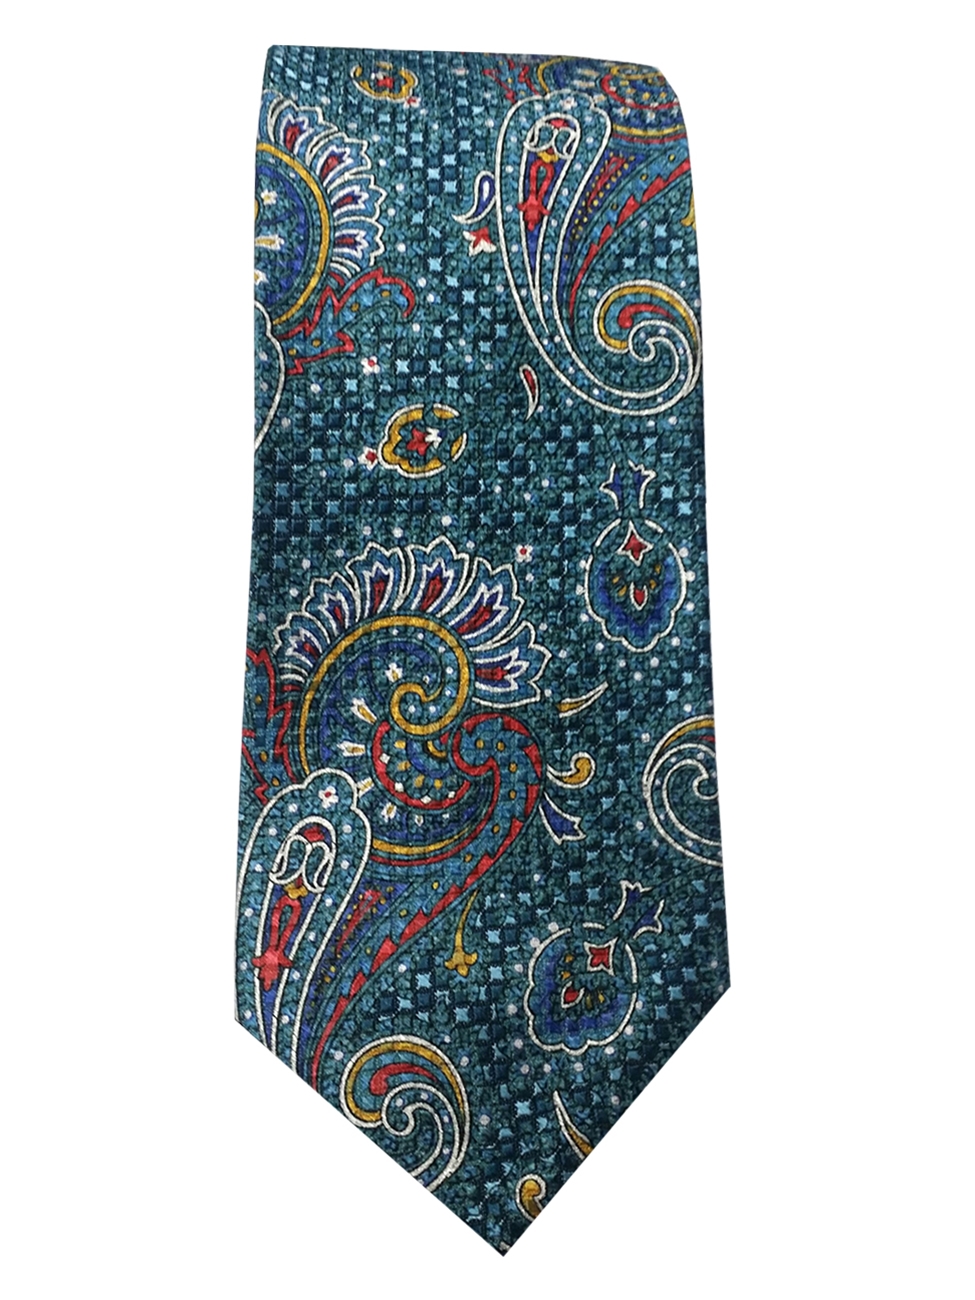 Robert Talbott Teal With White,Yellow and Red Paisley Pattern 7 Fold ...